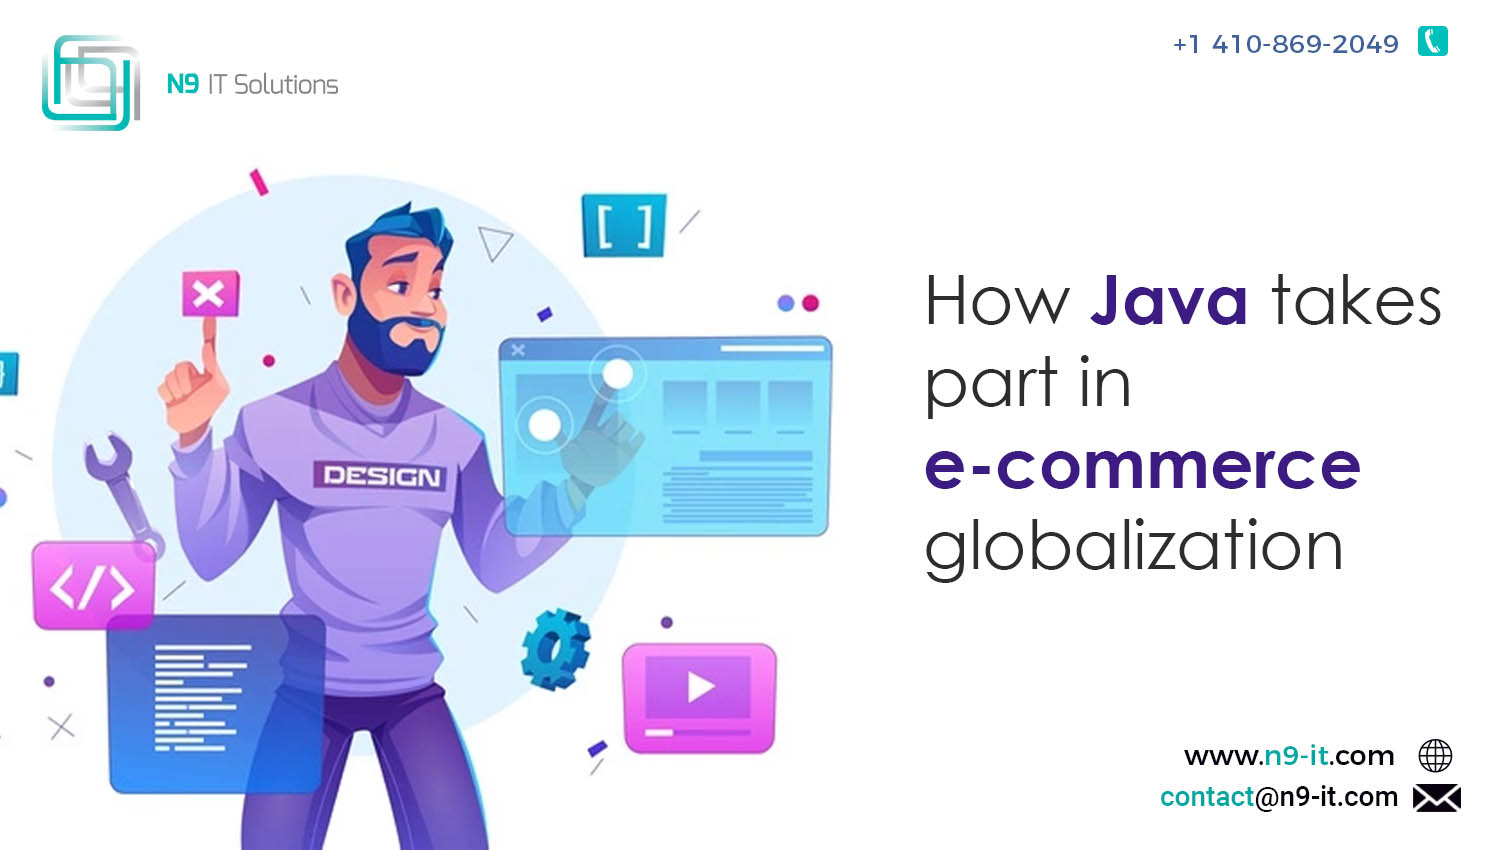 How Java takes part in e-commerce globalization